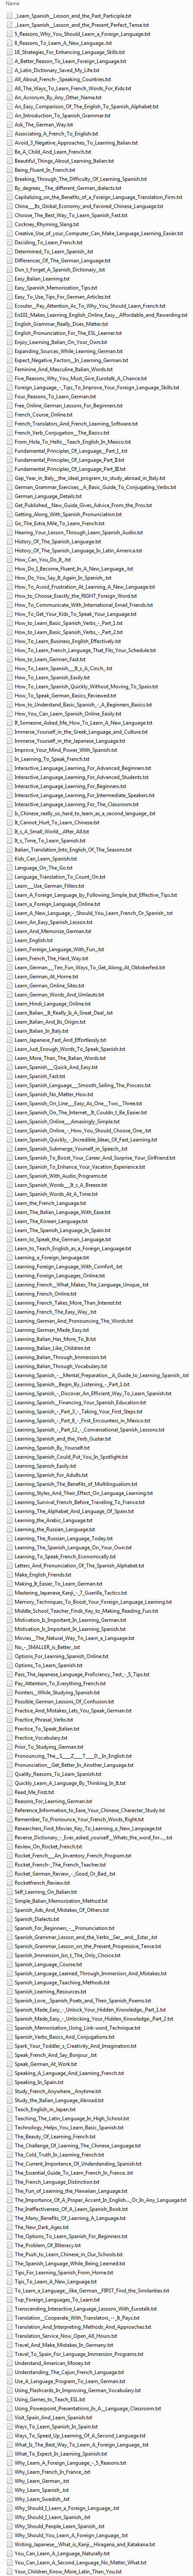 Language Learning PLR Articles